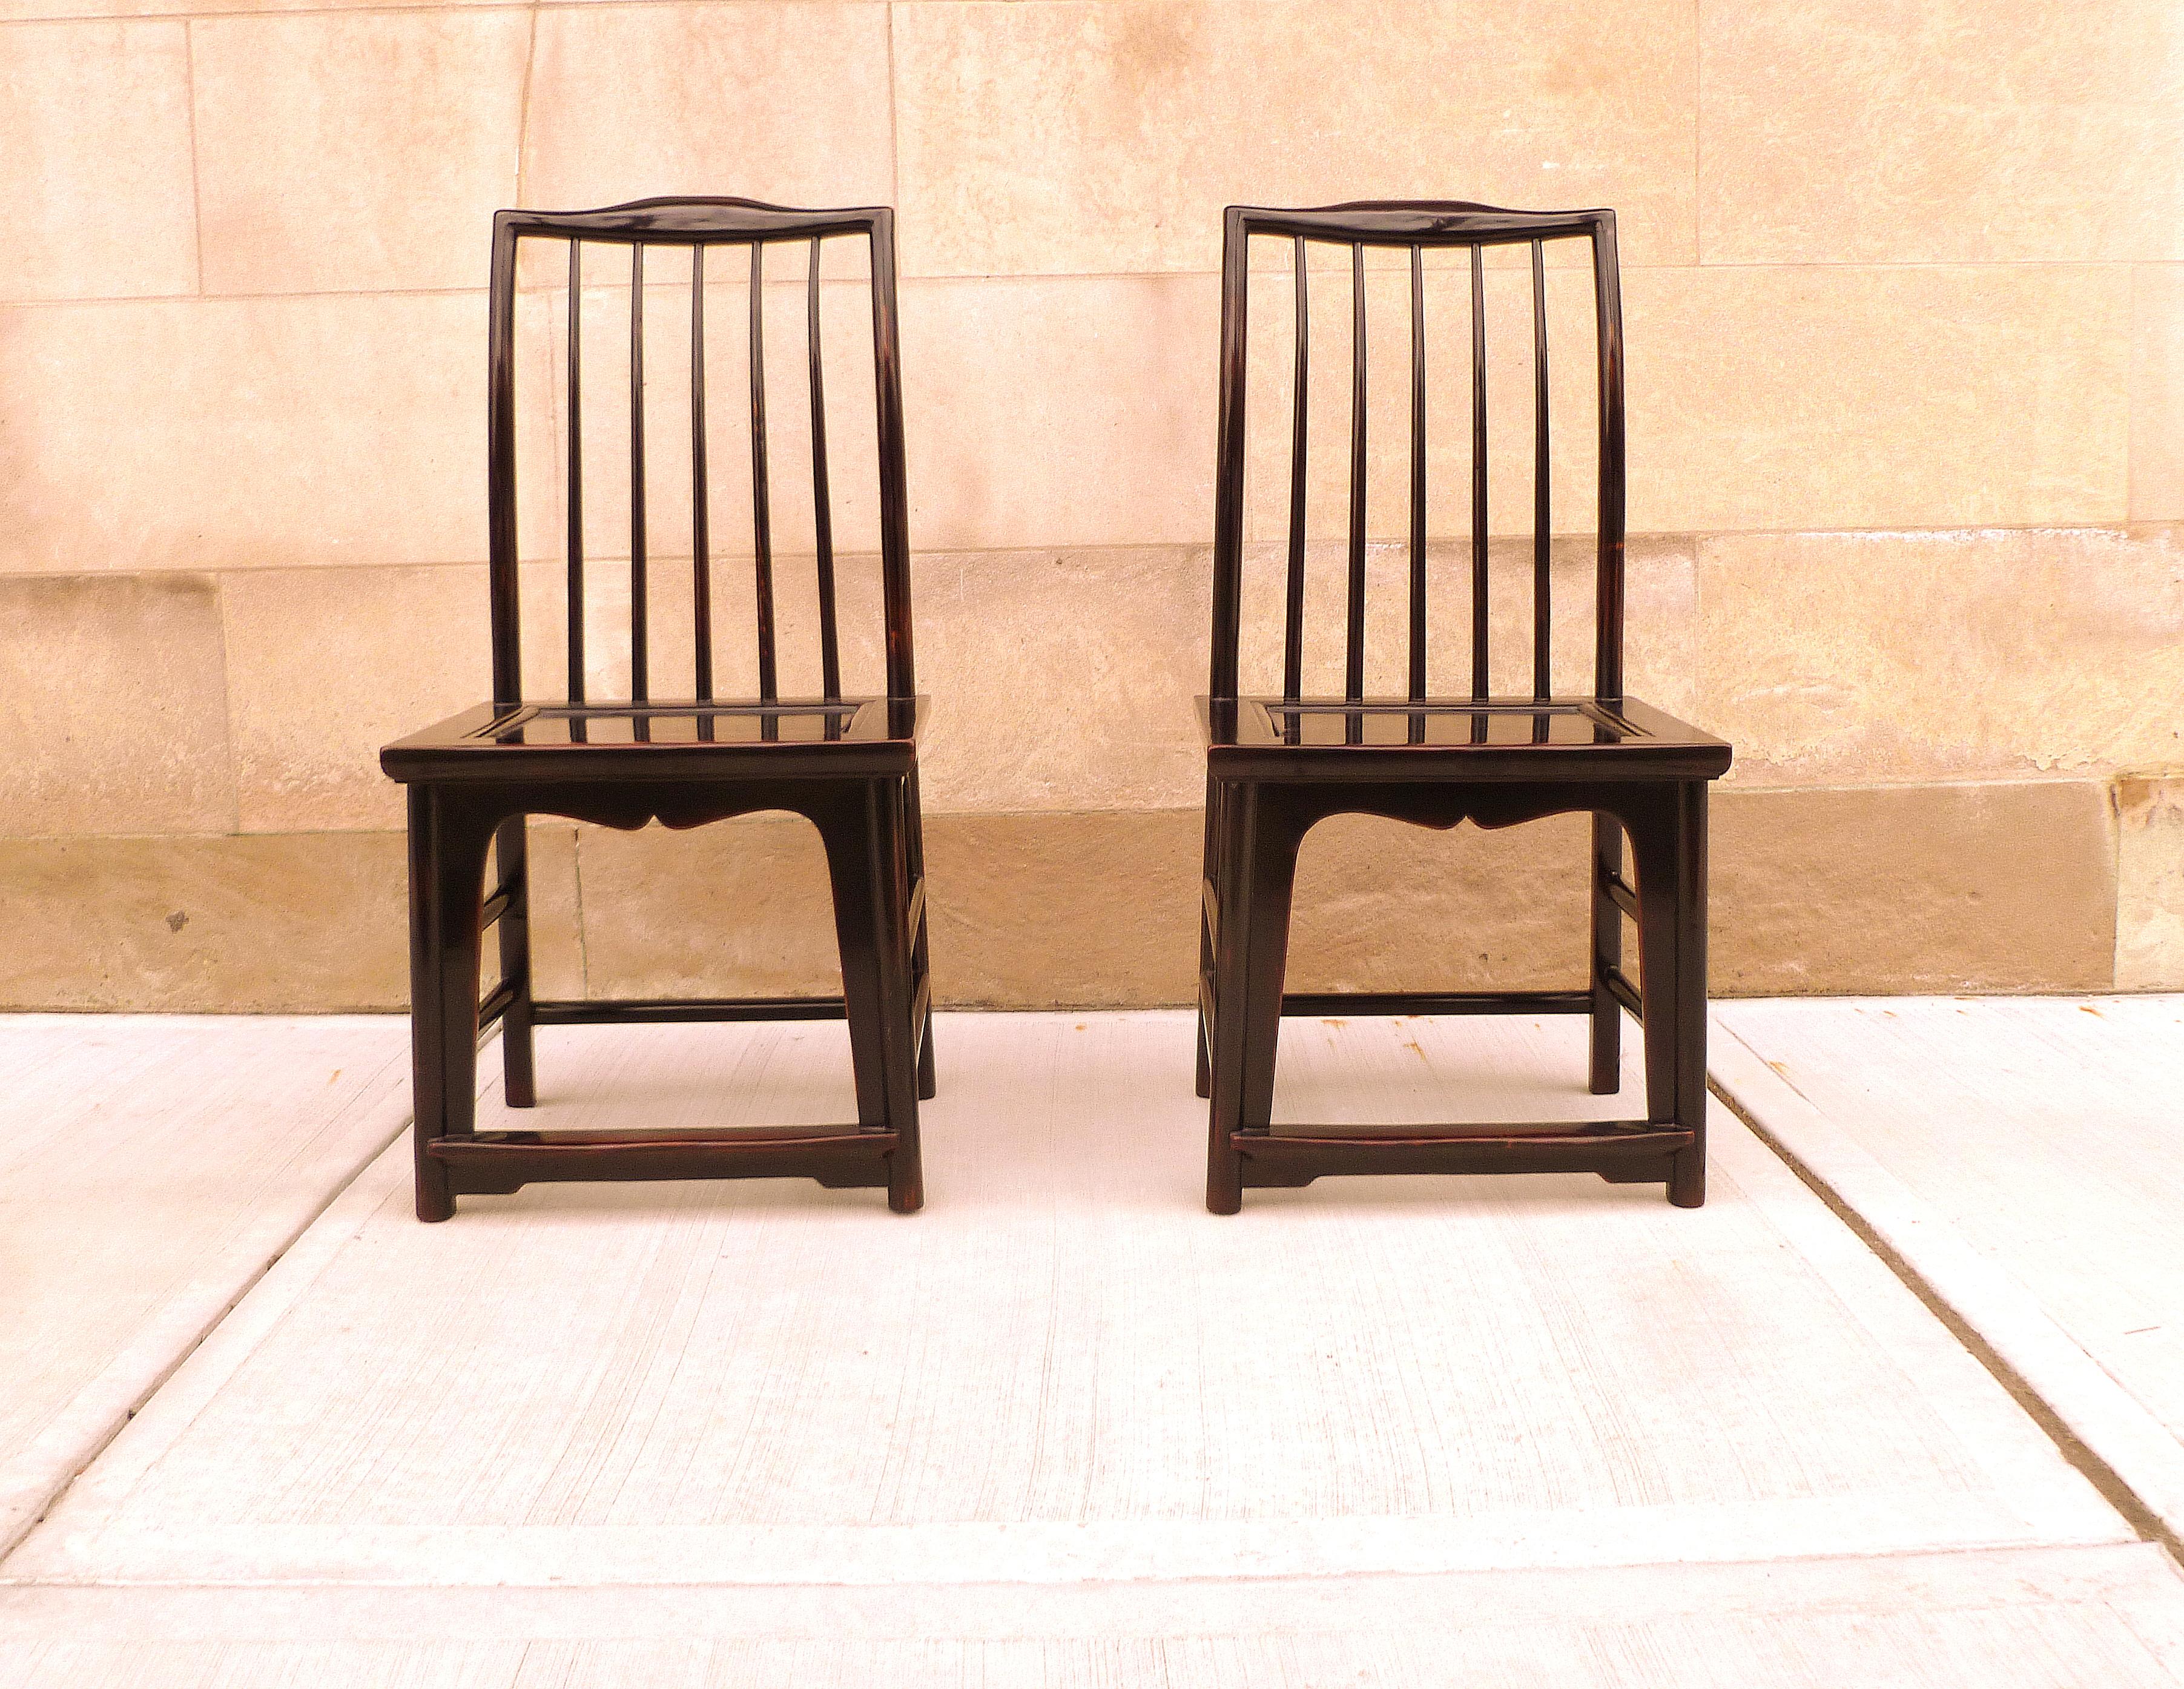 Pair of black lacquer hat chairs. Simple and elegant black lacquer hat chairs, beautiful form and lines. We carry fine quality furniture with elegant finished and has been appeared many times in 